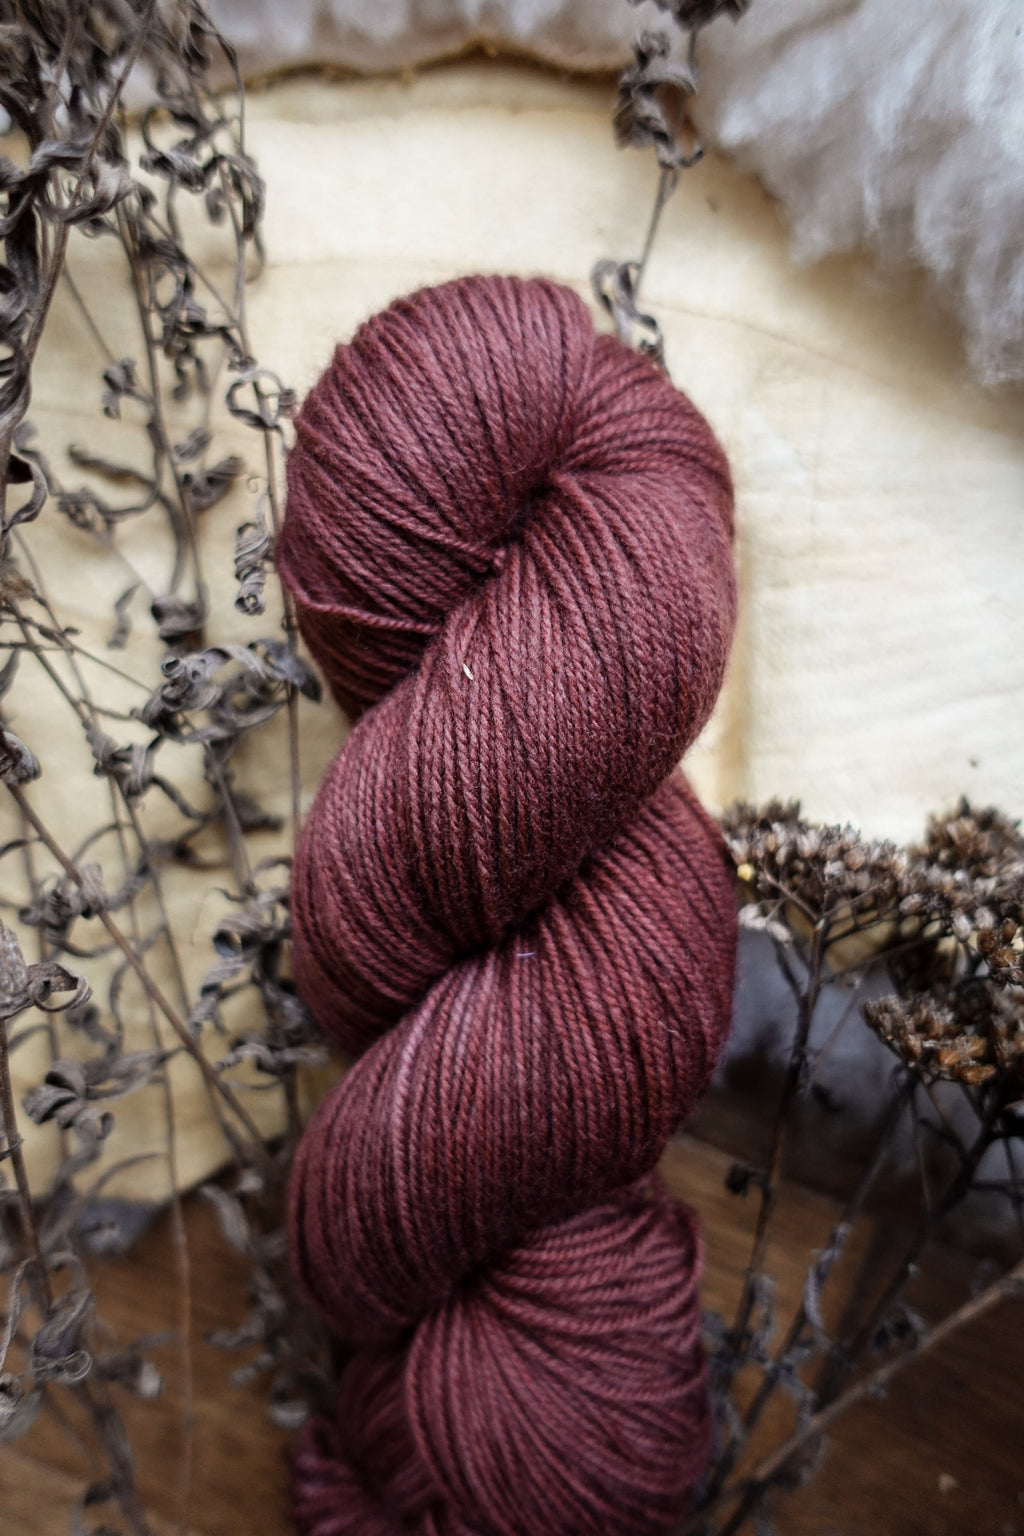 A fingering weight skein of natural fiber yarn has been hand dyed a reddish pink. It lays on a tabletop next to dried flowers.